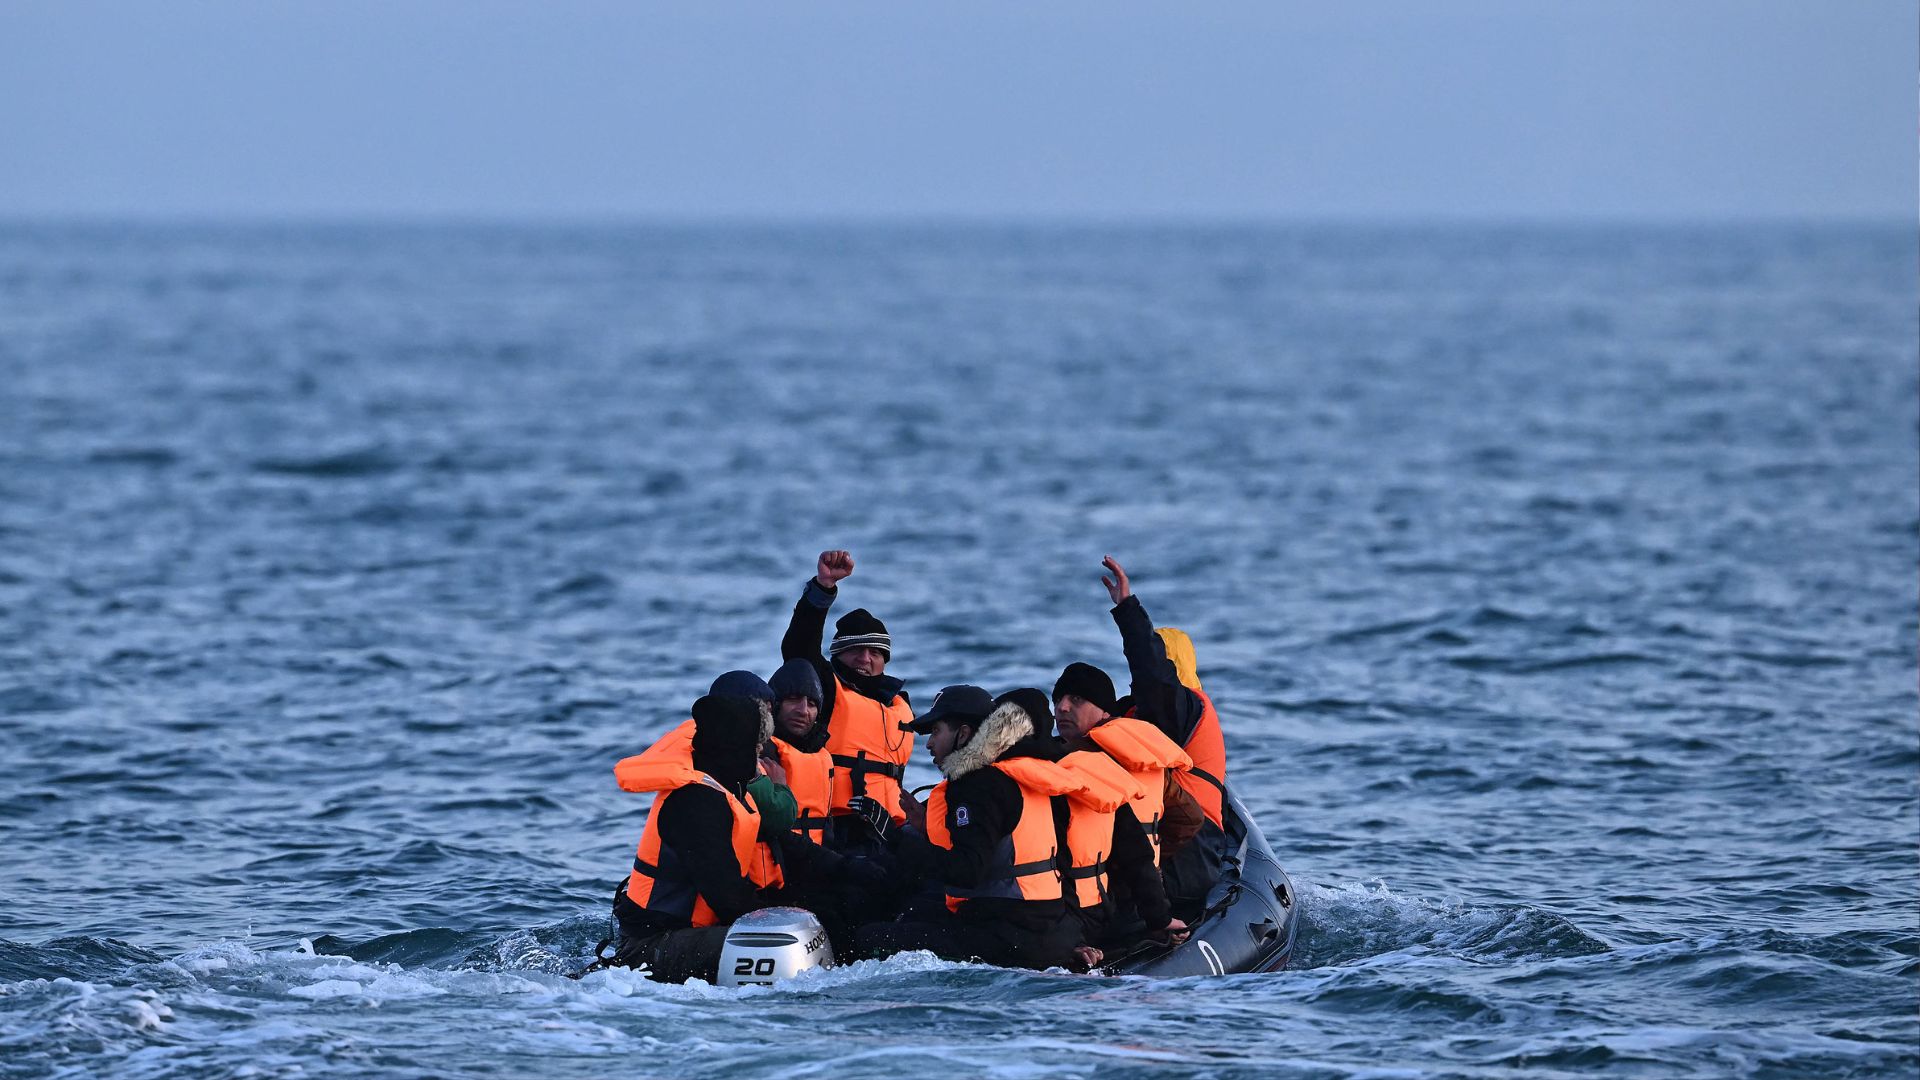 The UK government wants to prevent migrant boats like this traveling across the English Channel. /Ben Stansall/AFP